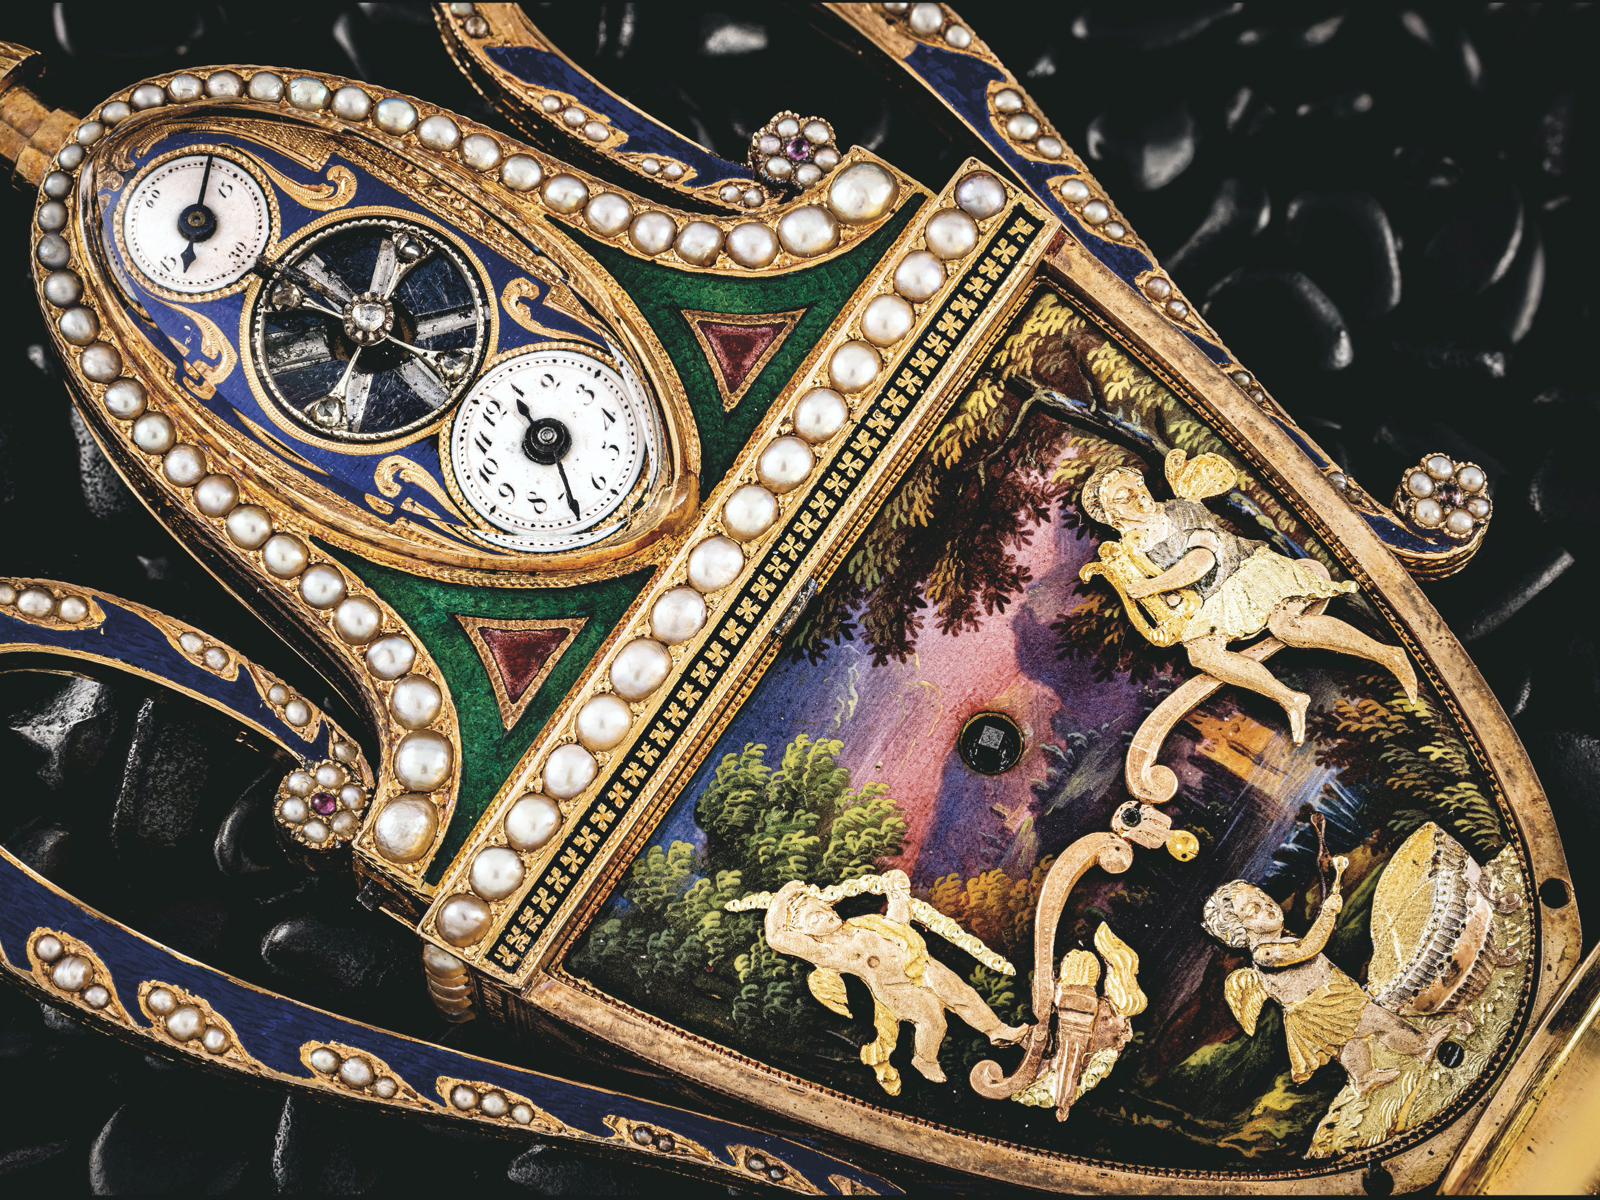 A highly decorated enamel table watch